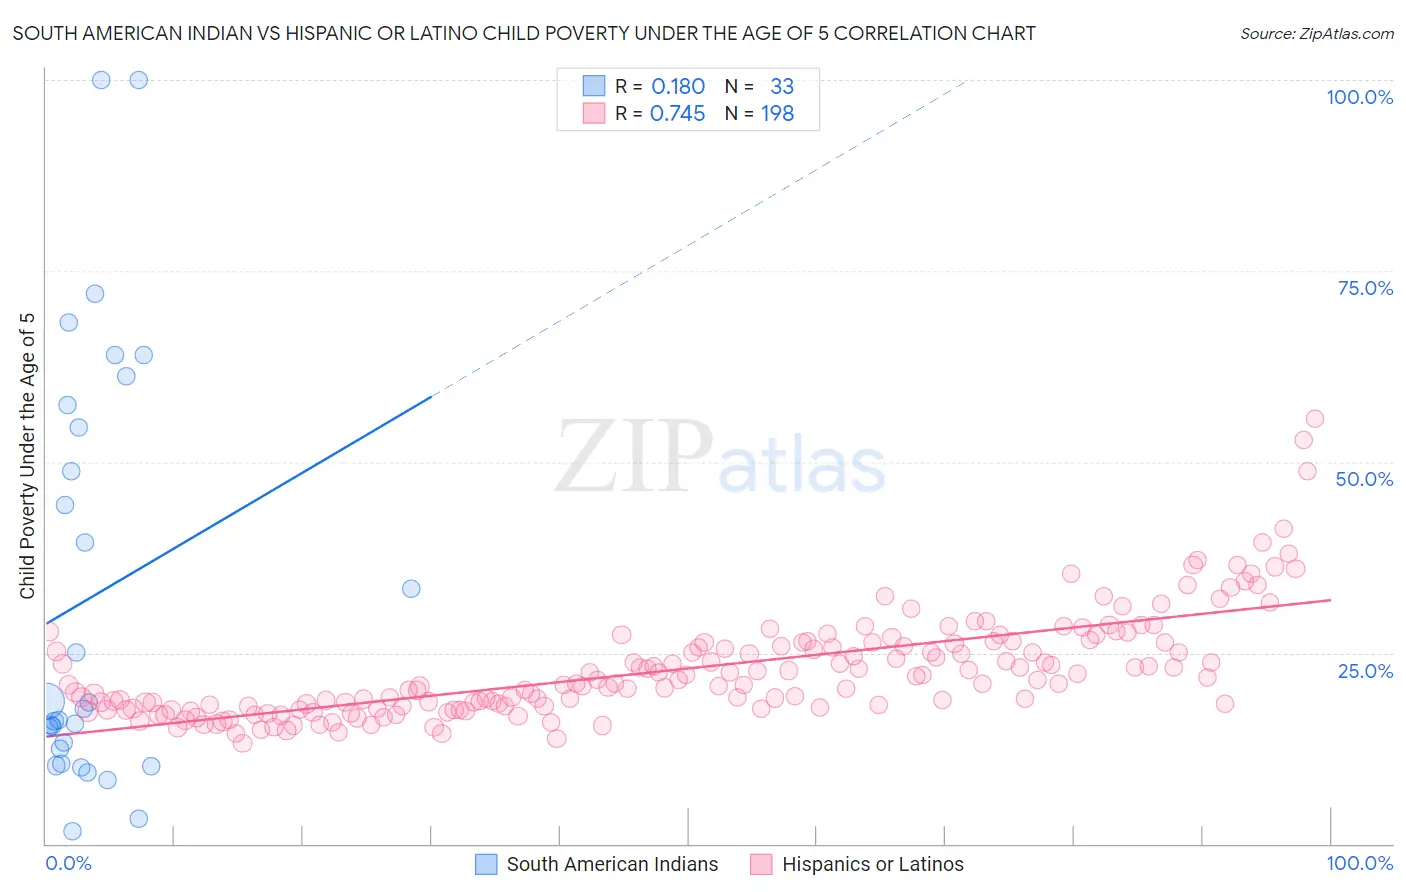 South American Indian vs Hispanic or Latino Child Poverty Under the Age of 5